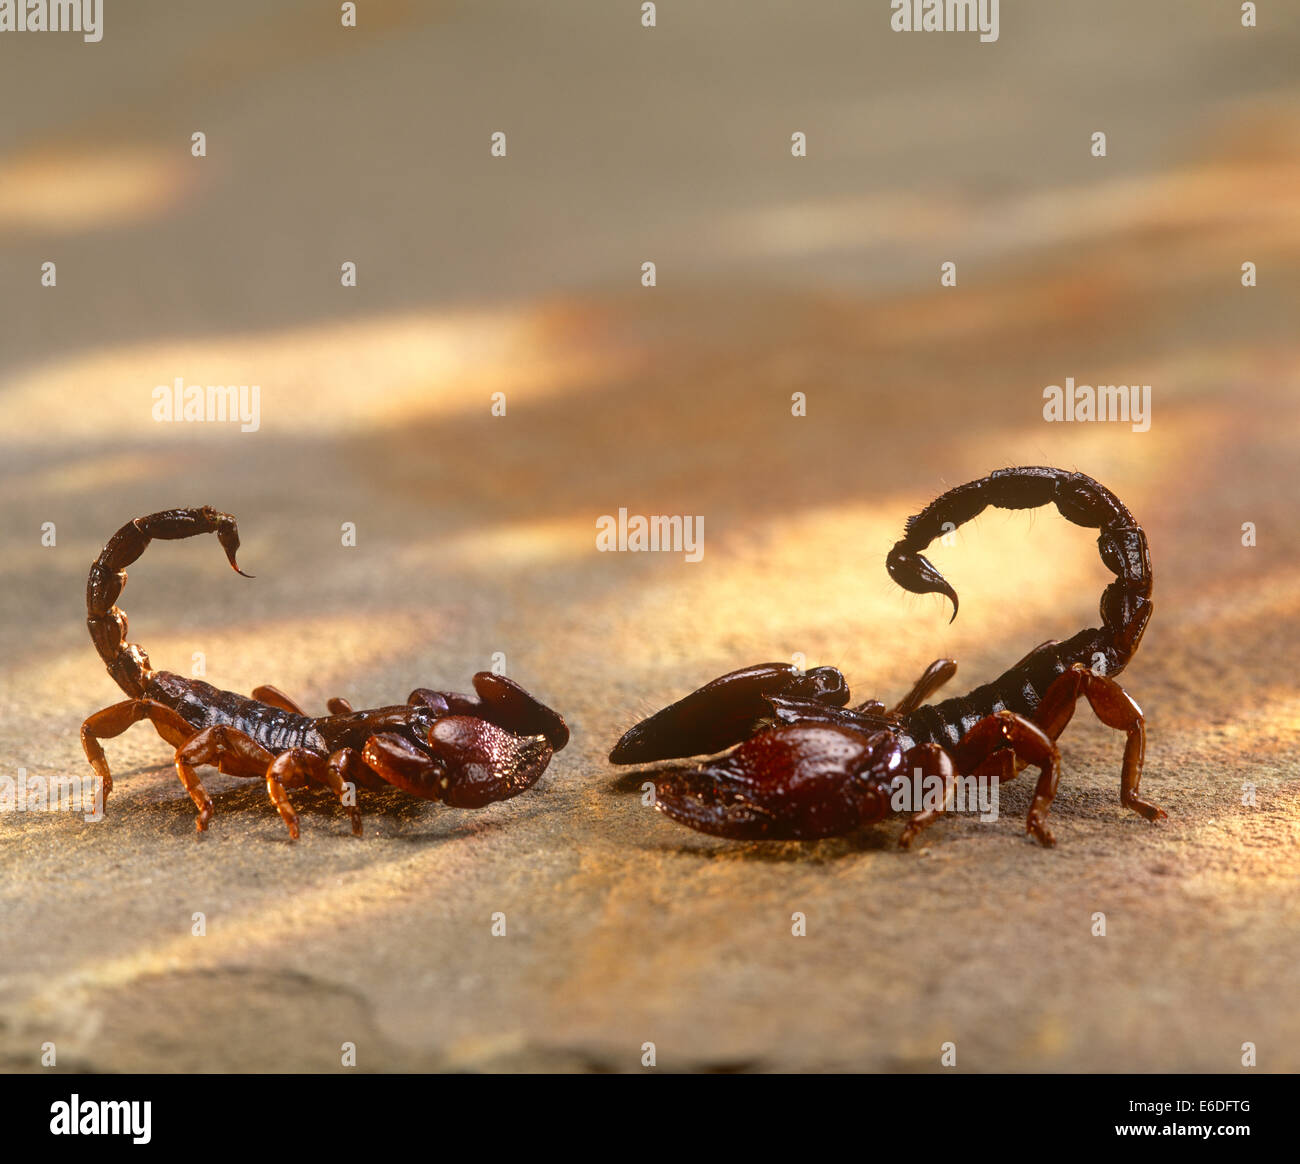 Two scorpions facing each other Stock Photo